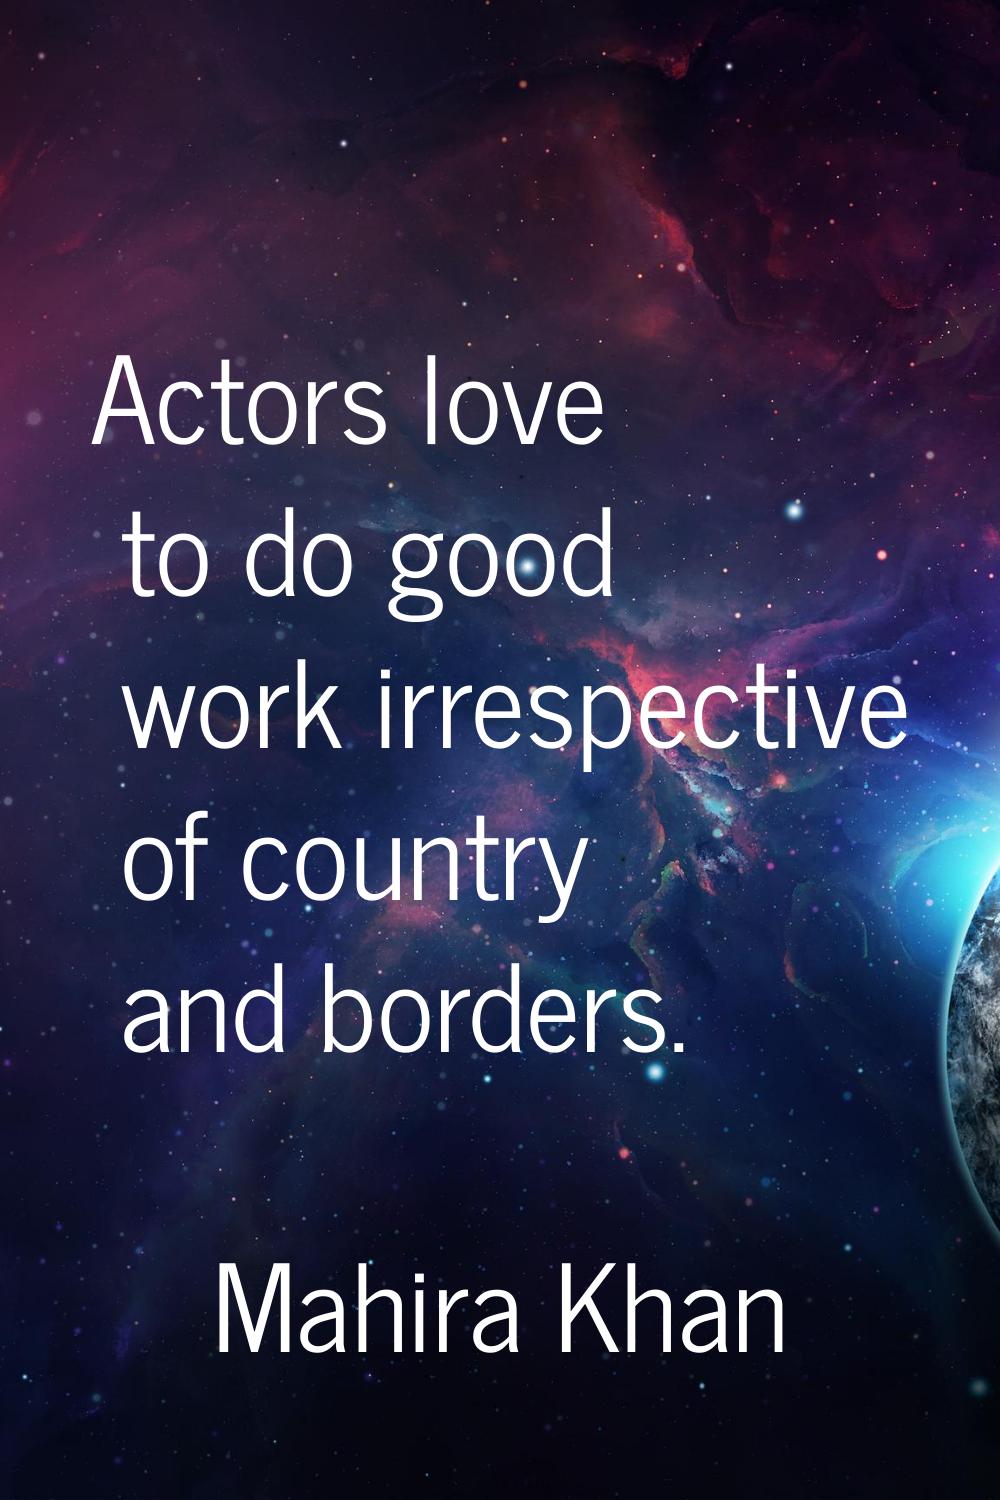 Actors love to do good work irrespective of country and borders.